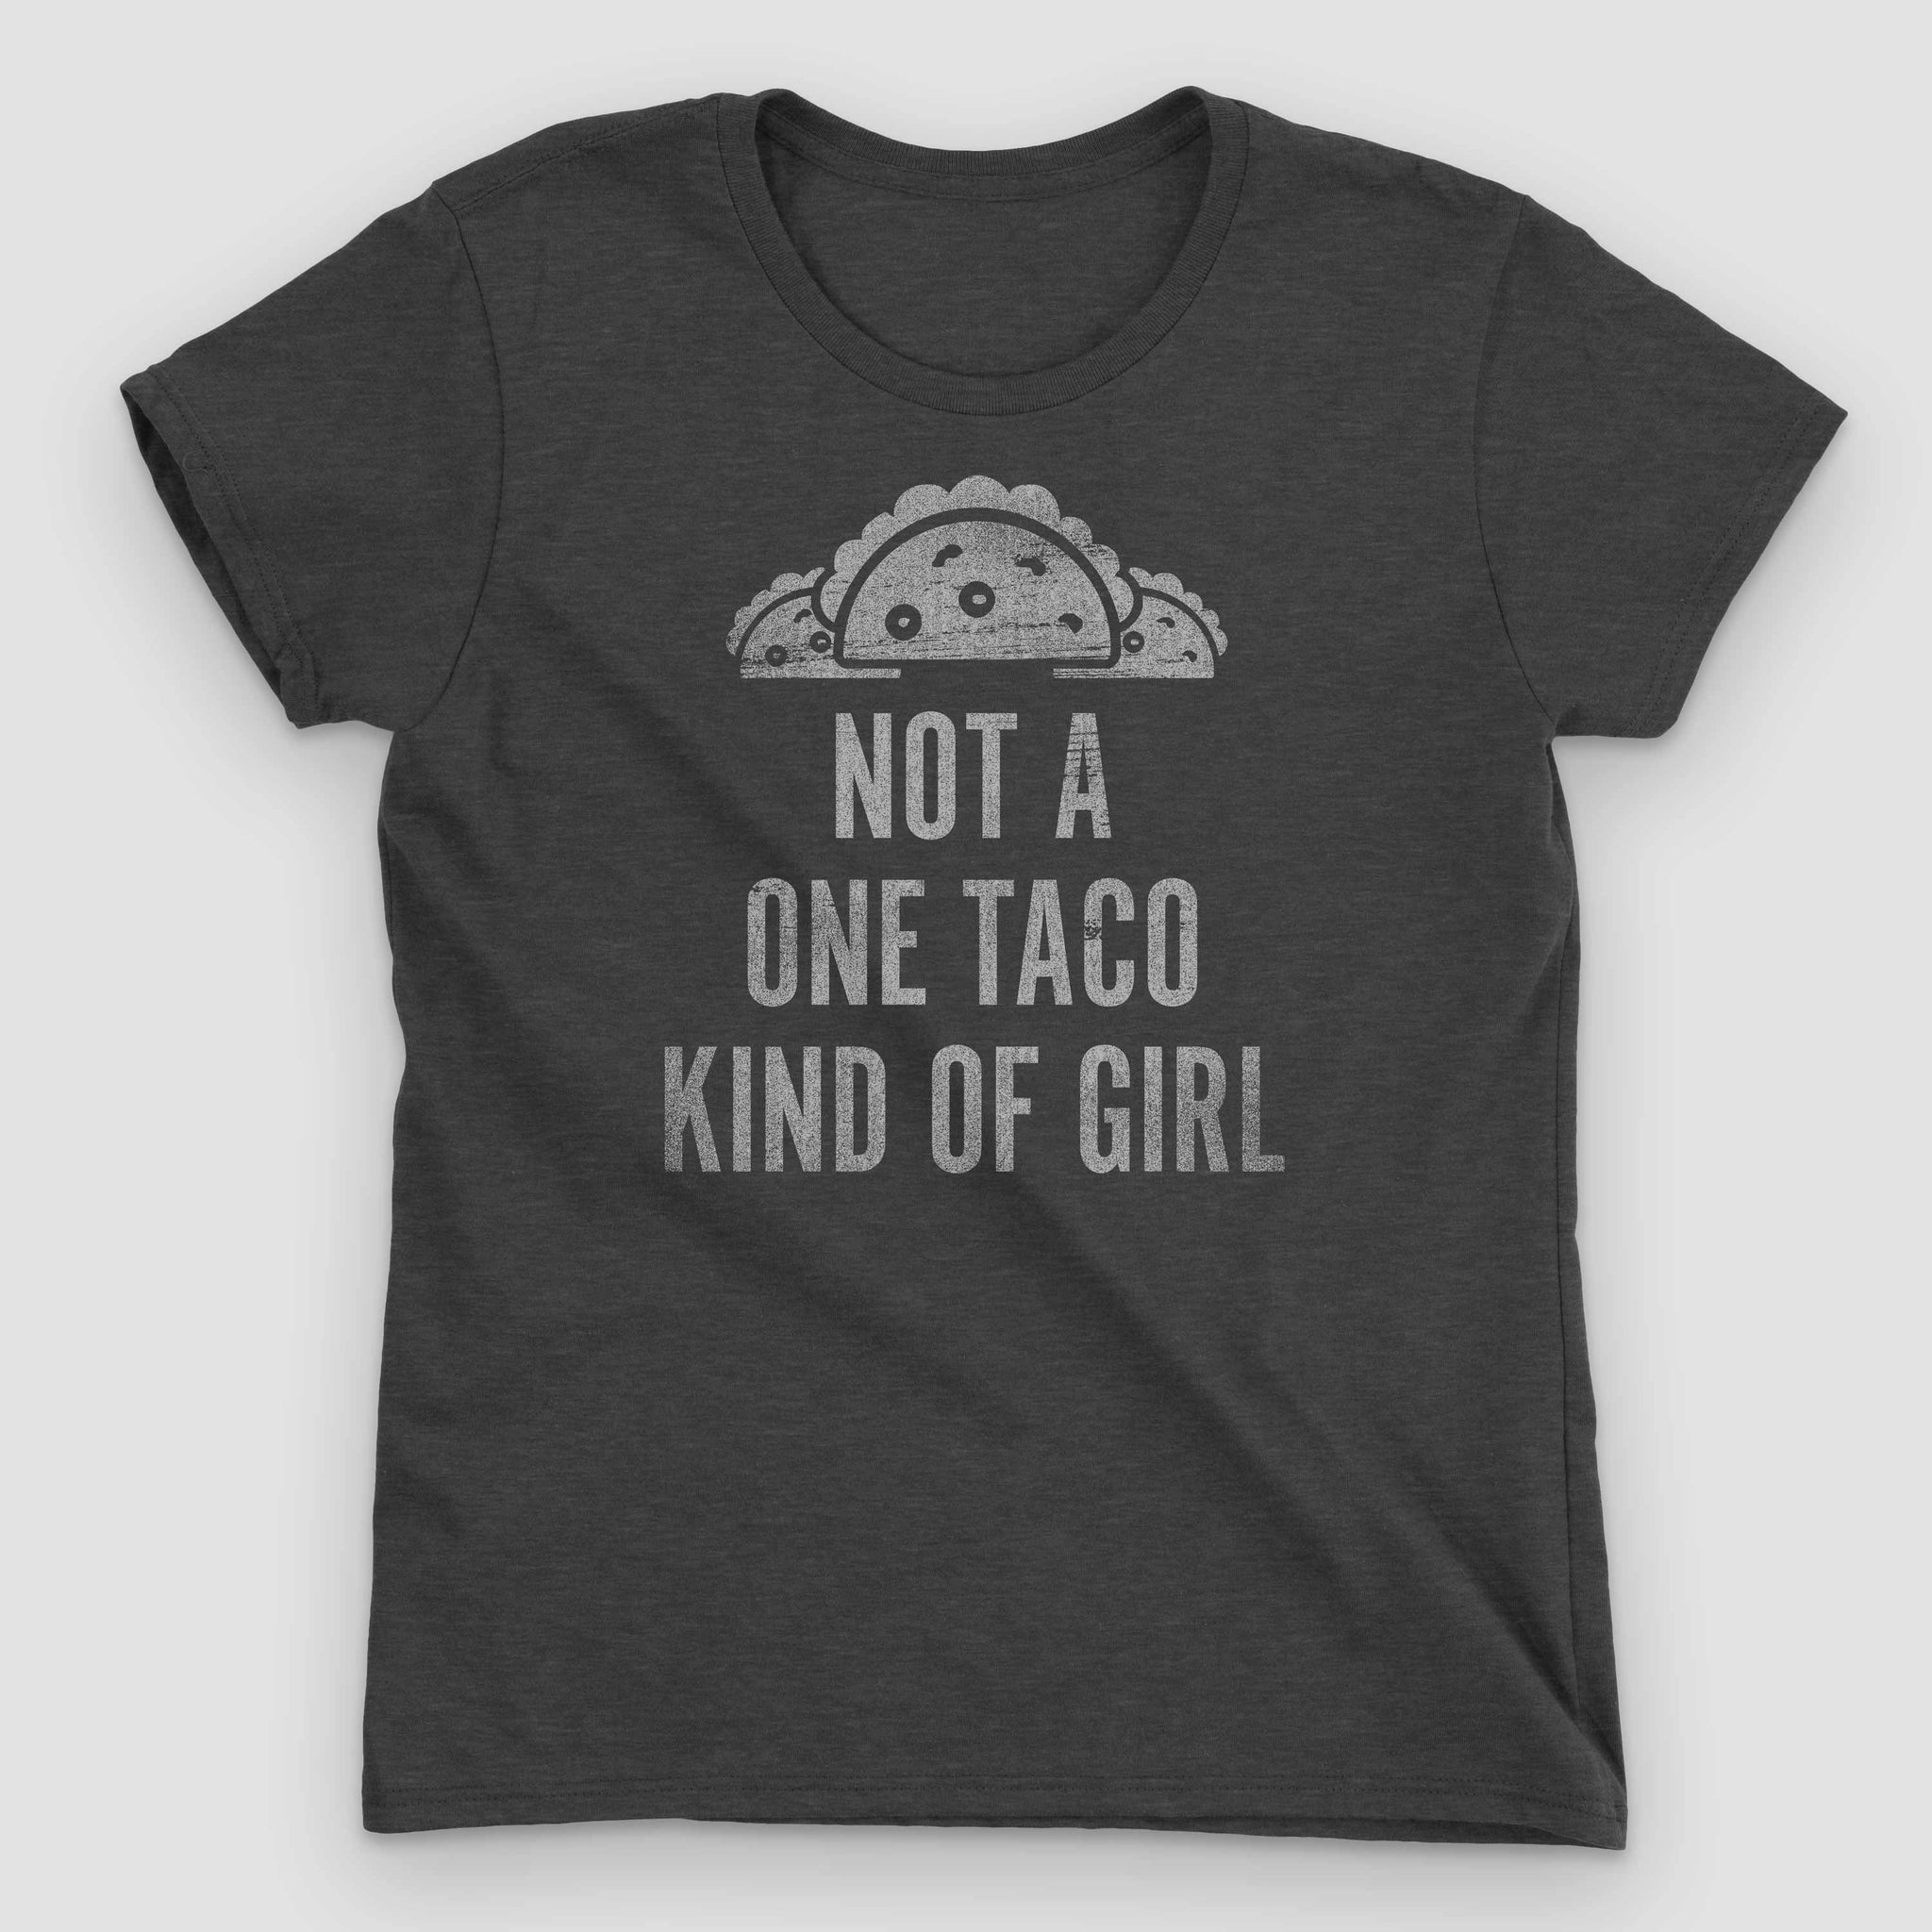 Not a One Taco Kind of Girl Women's Graphic T-Shirt